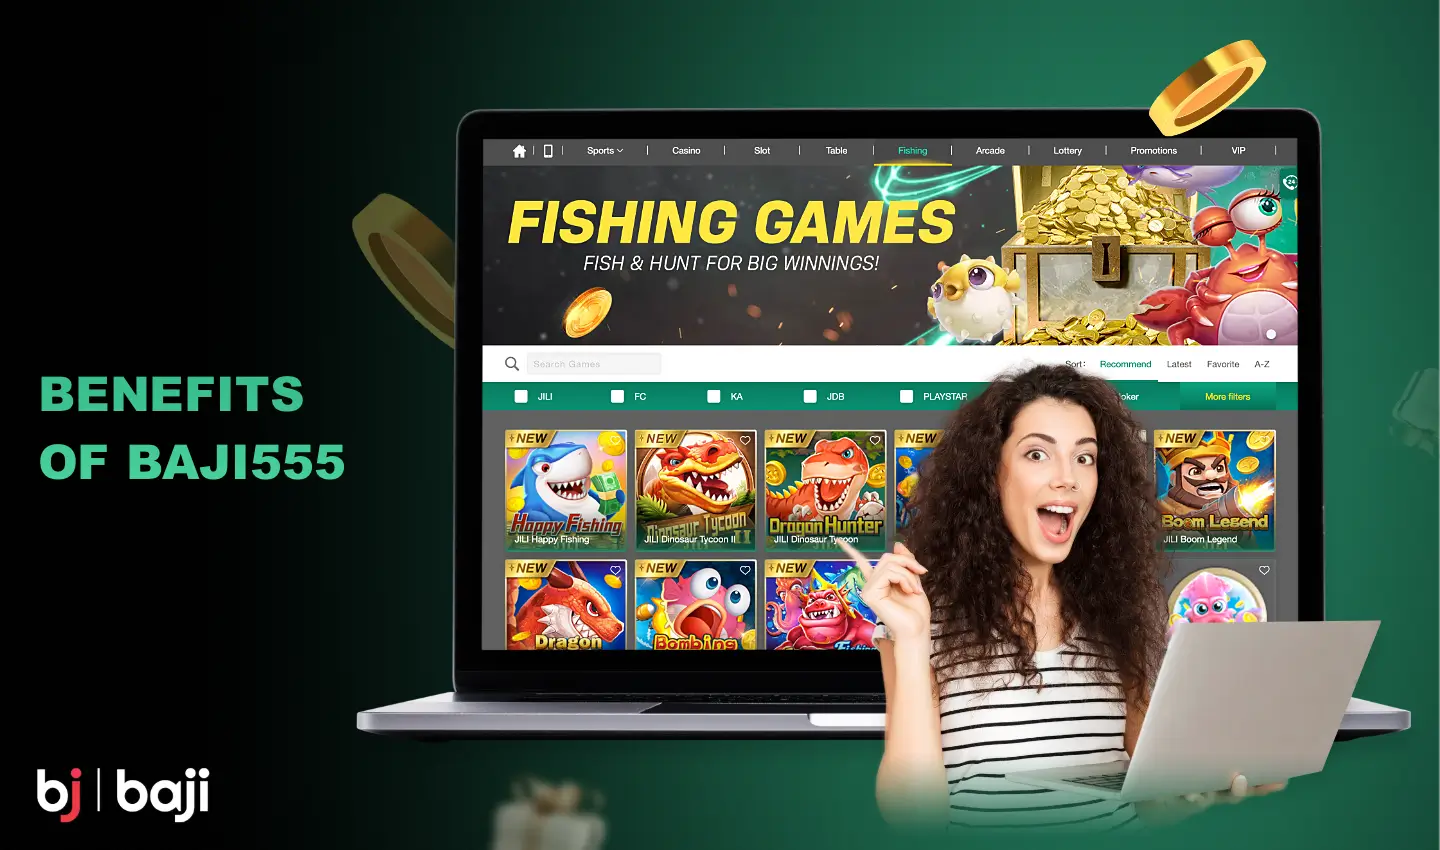 Baji 555 has a number of advantages that make tens of thousands of players choose this platform for casino games and sports betting